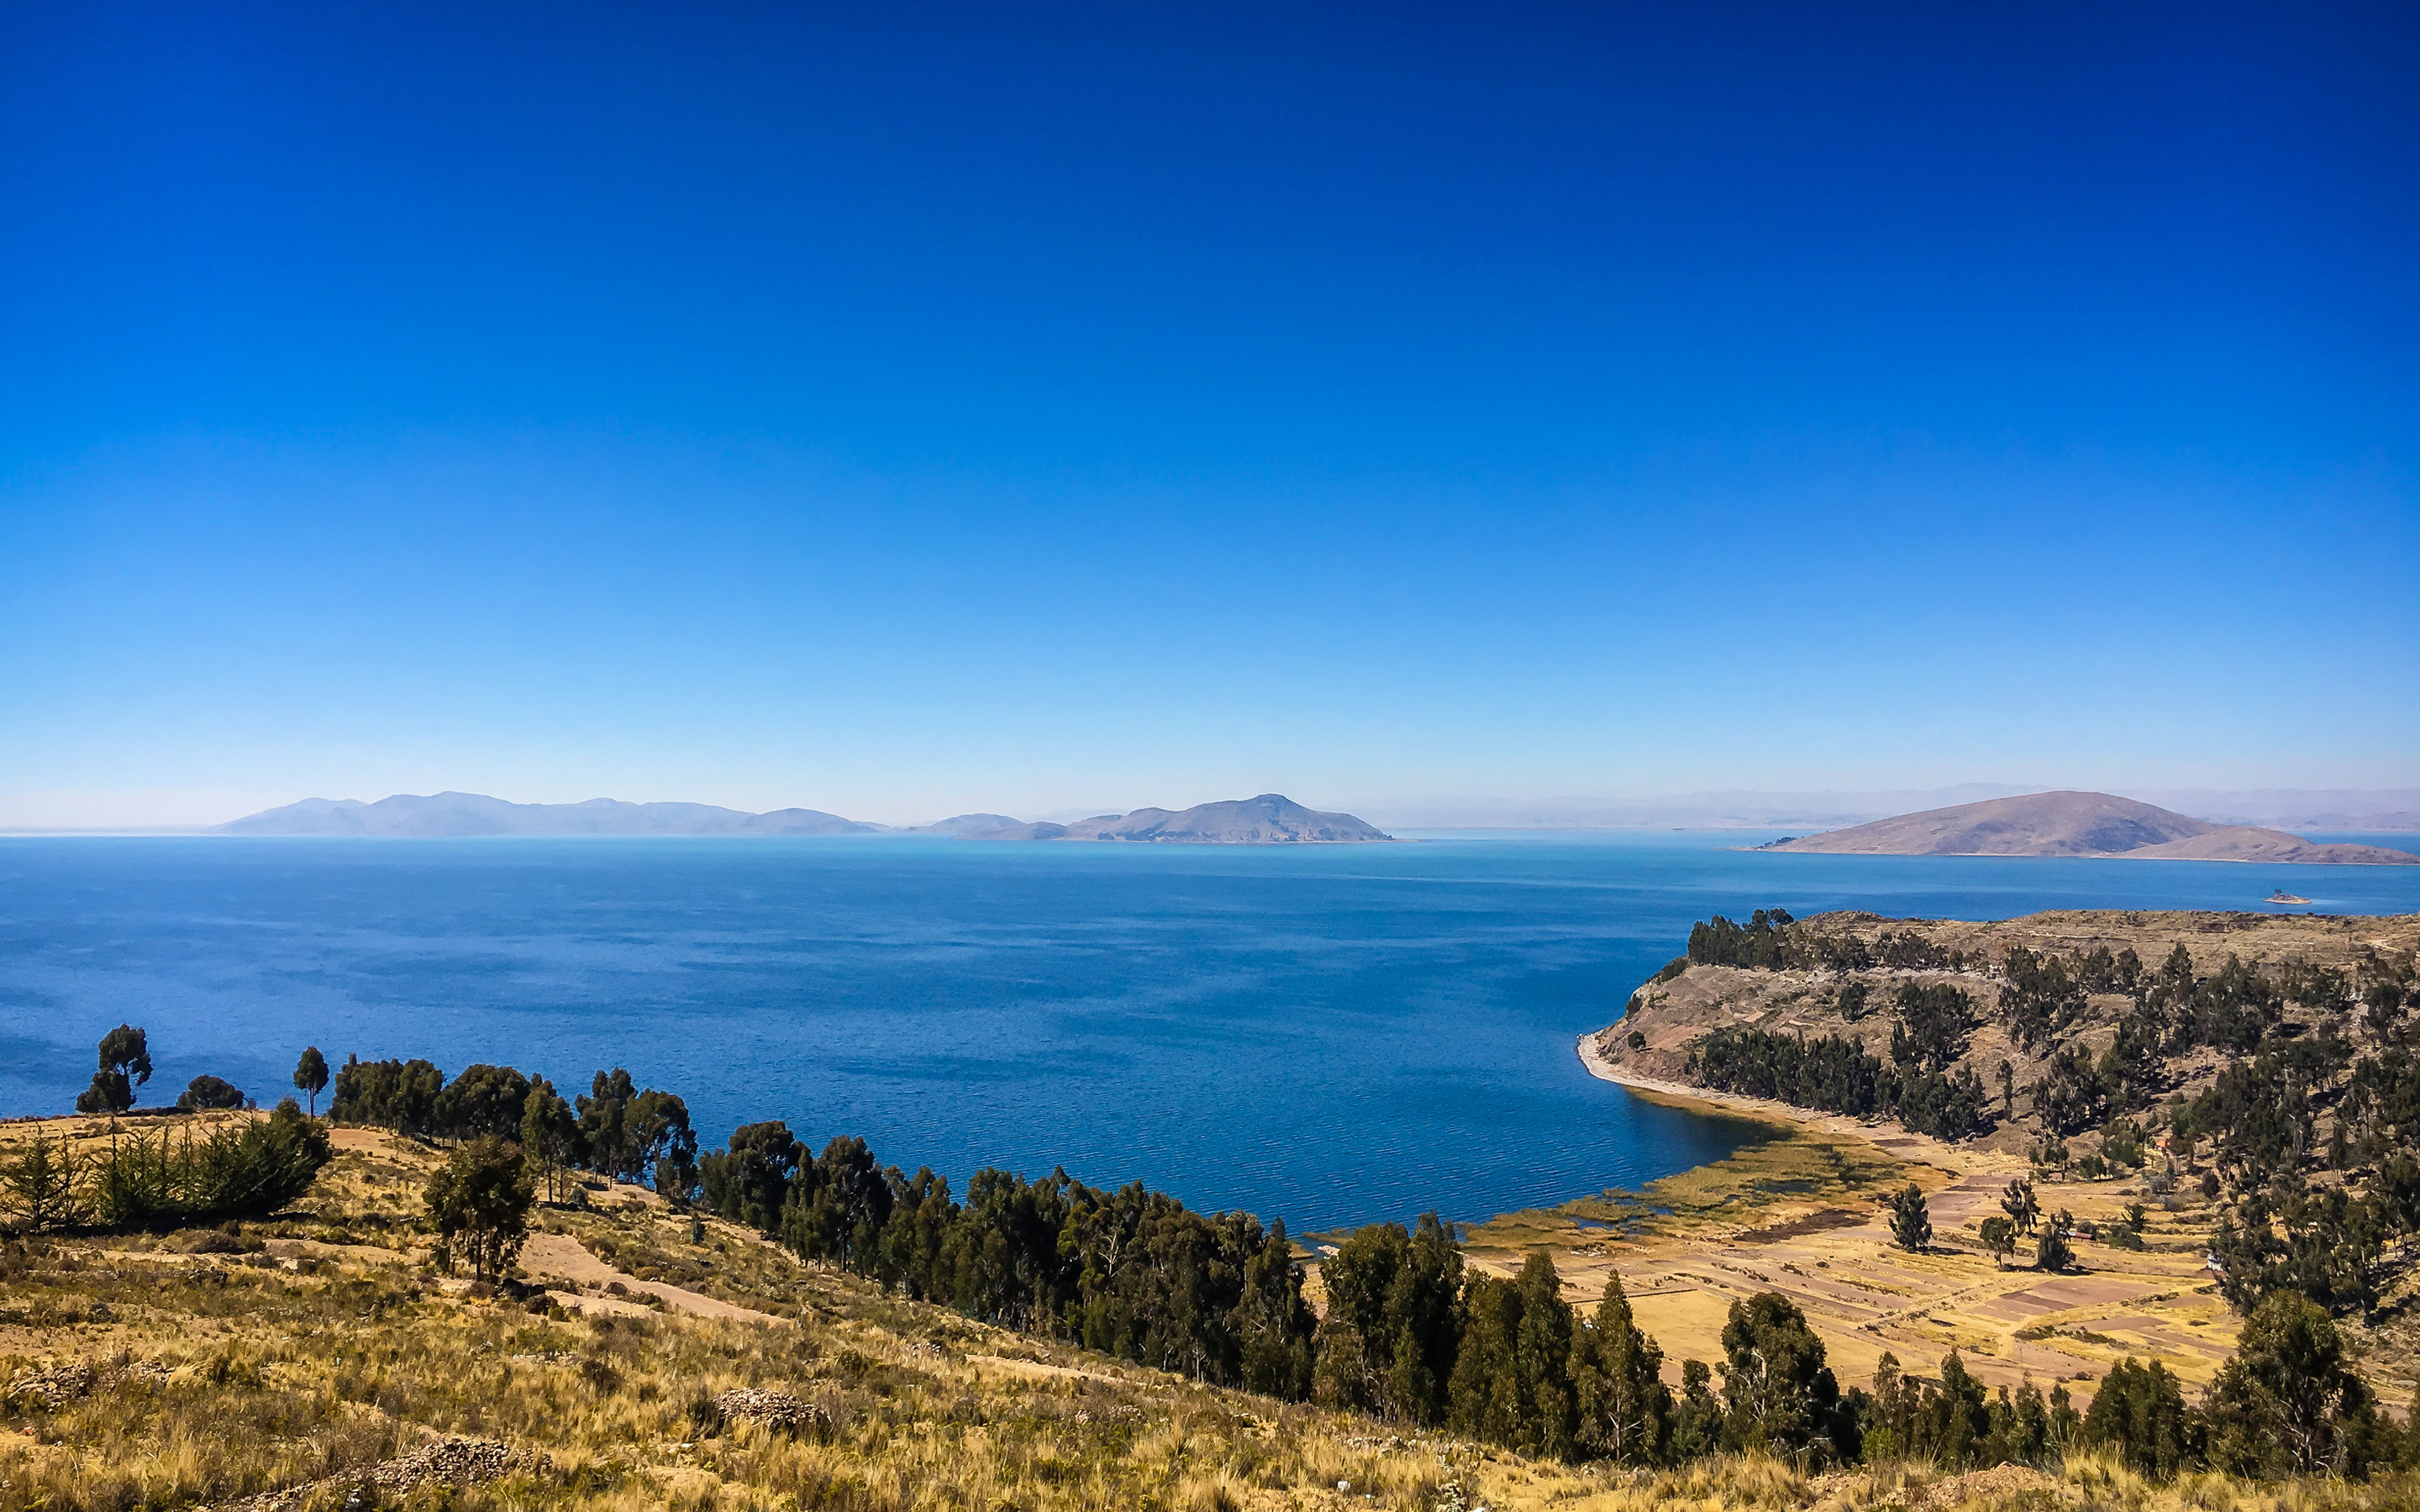 Lake Titicaca wallpapers, Ethan Sellers, Inspiring landscapes, Ethereal beauty, 2880x1800 HD Desktop